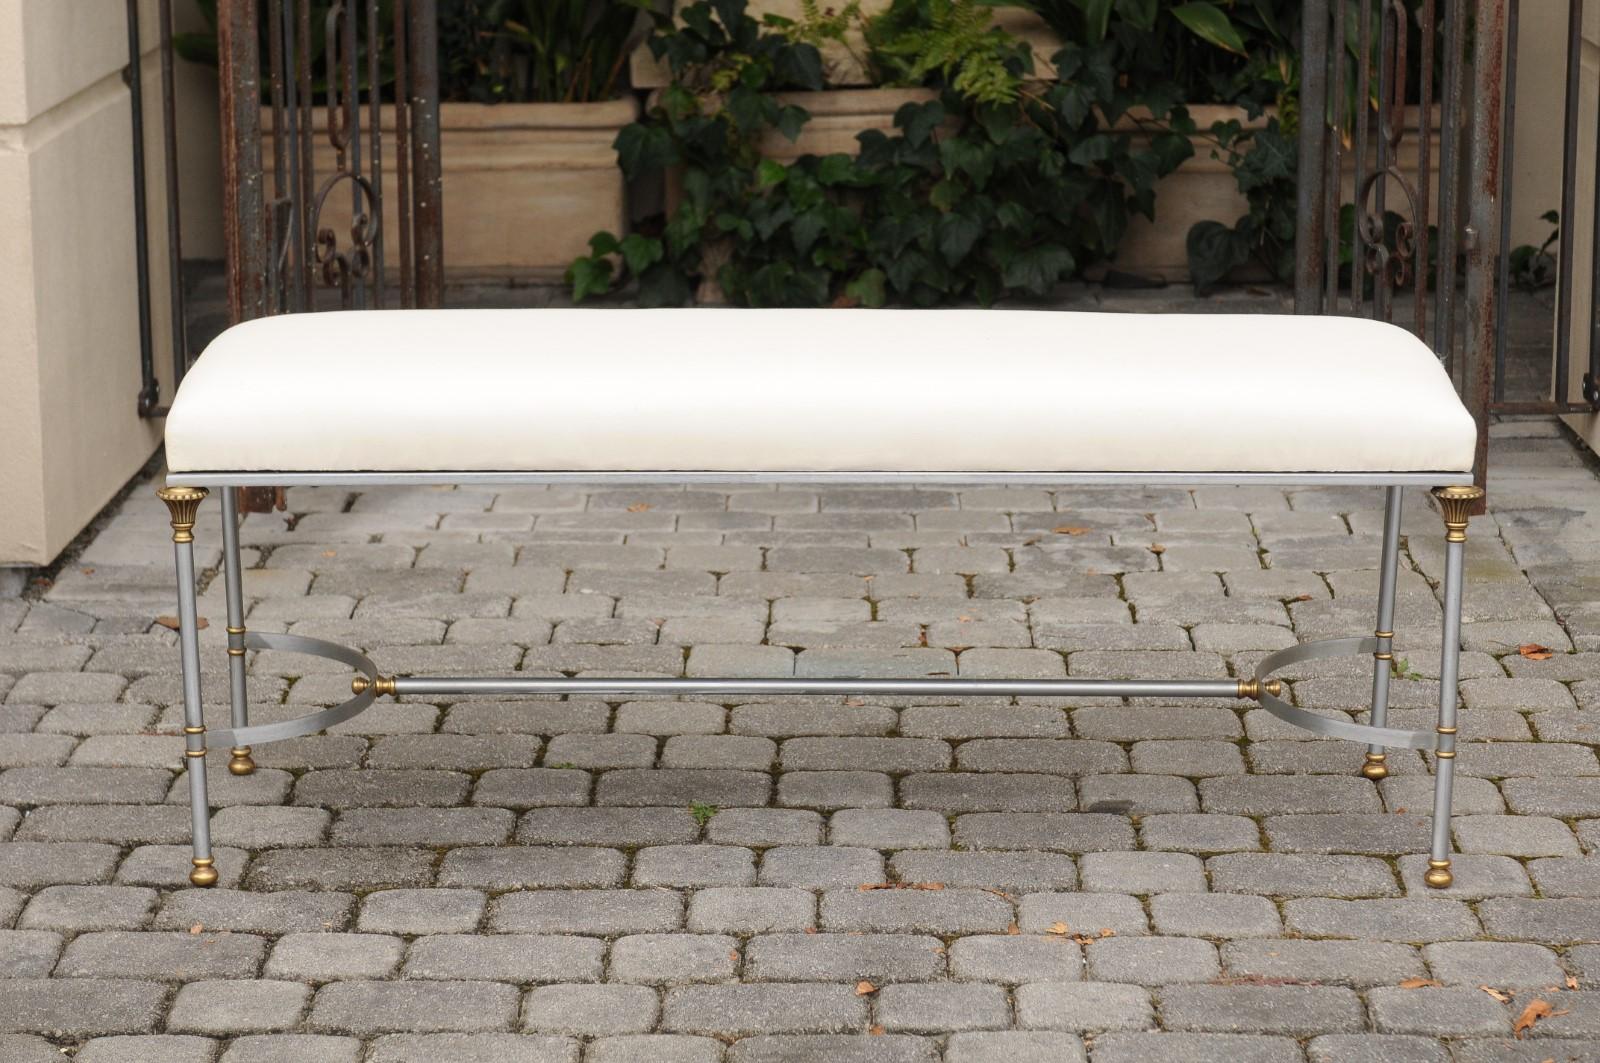 An Italian vintage Maison Jansen style steel and brass backless bench from the mid-20th century, with floriform capitals and new upholstery.  This Italian Mid-Century Modern Maison Jansen style backless bench features a rectangular upholstered seat